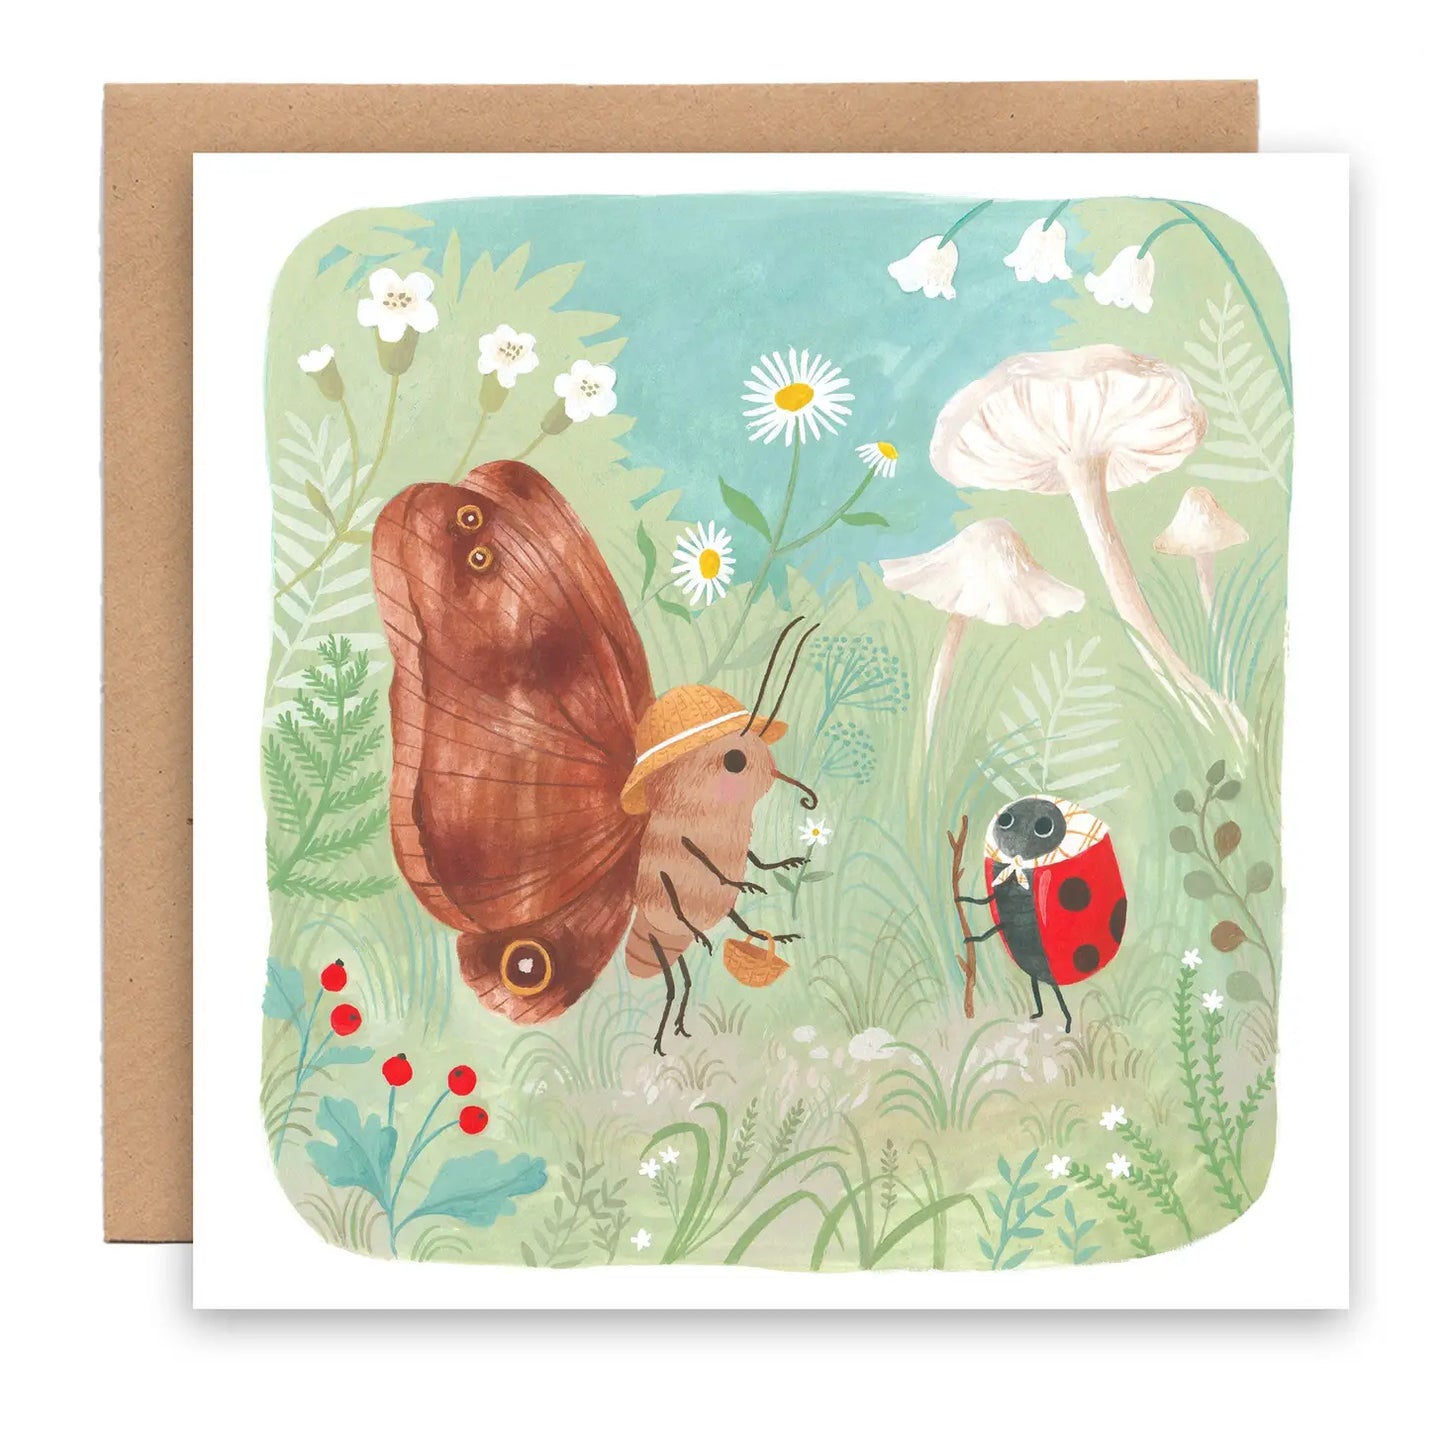 Butterfly and ladybug- Greeting card